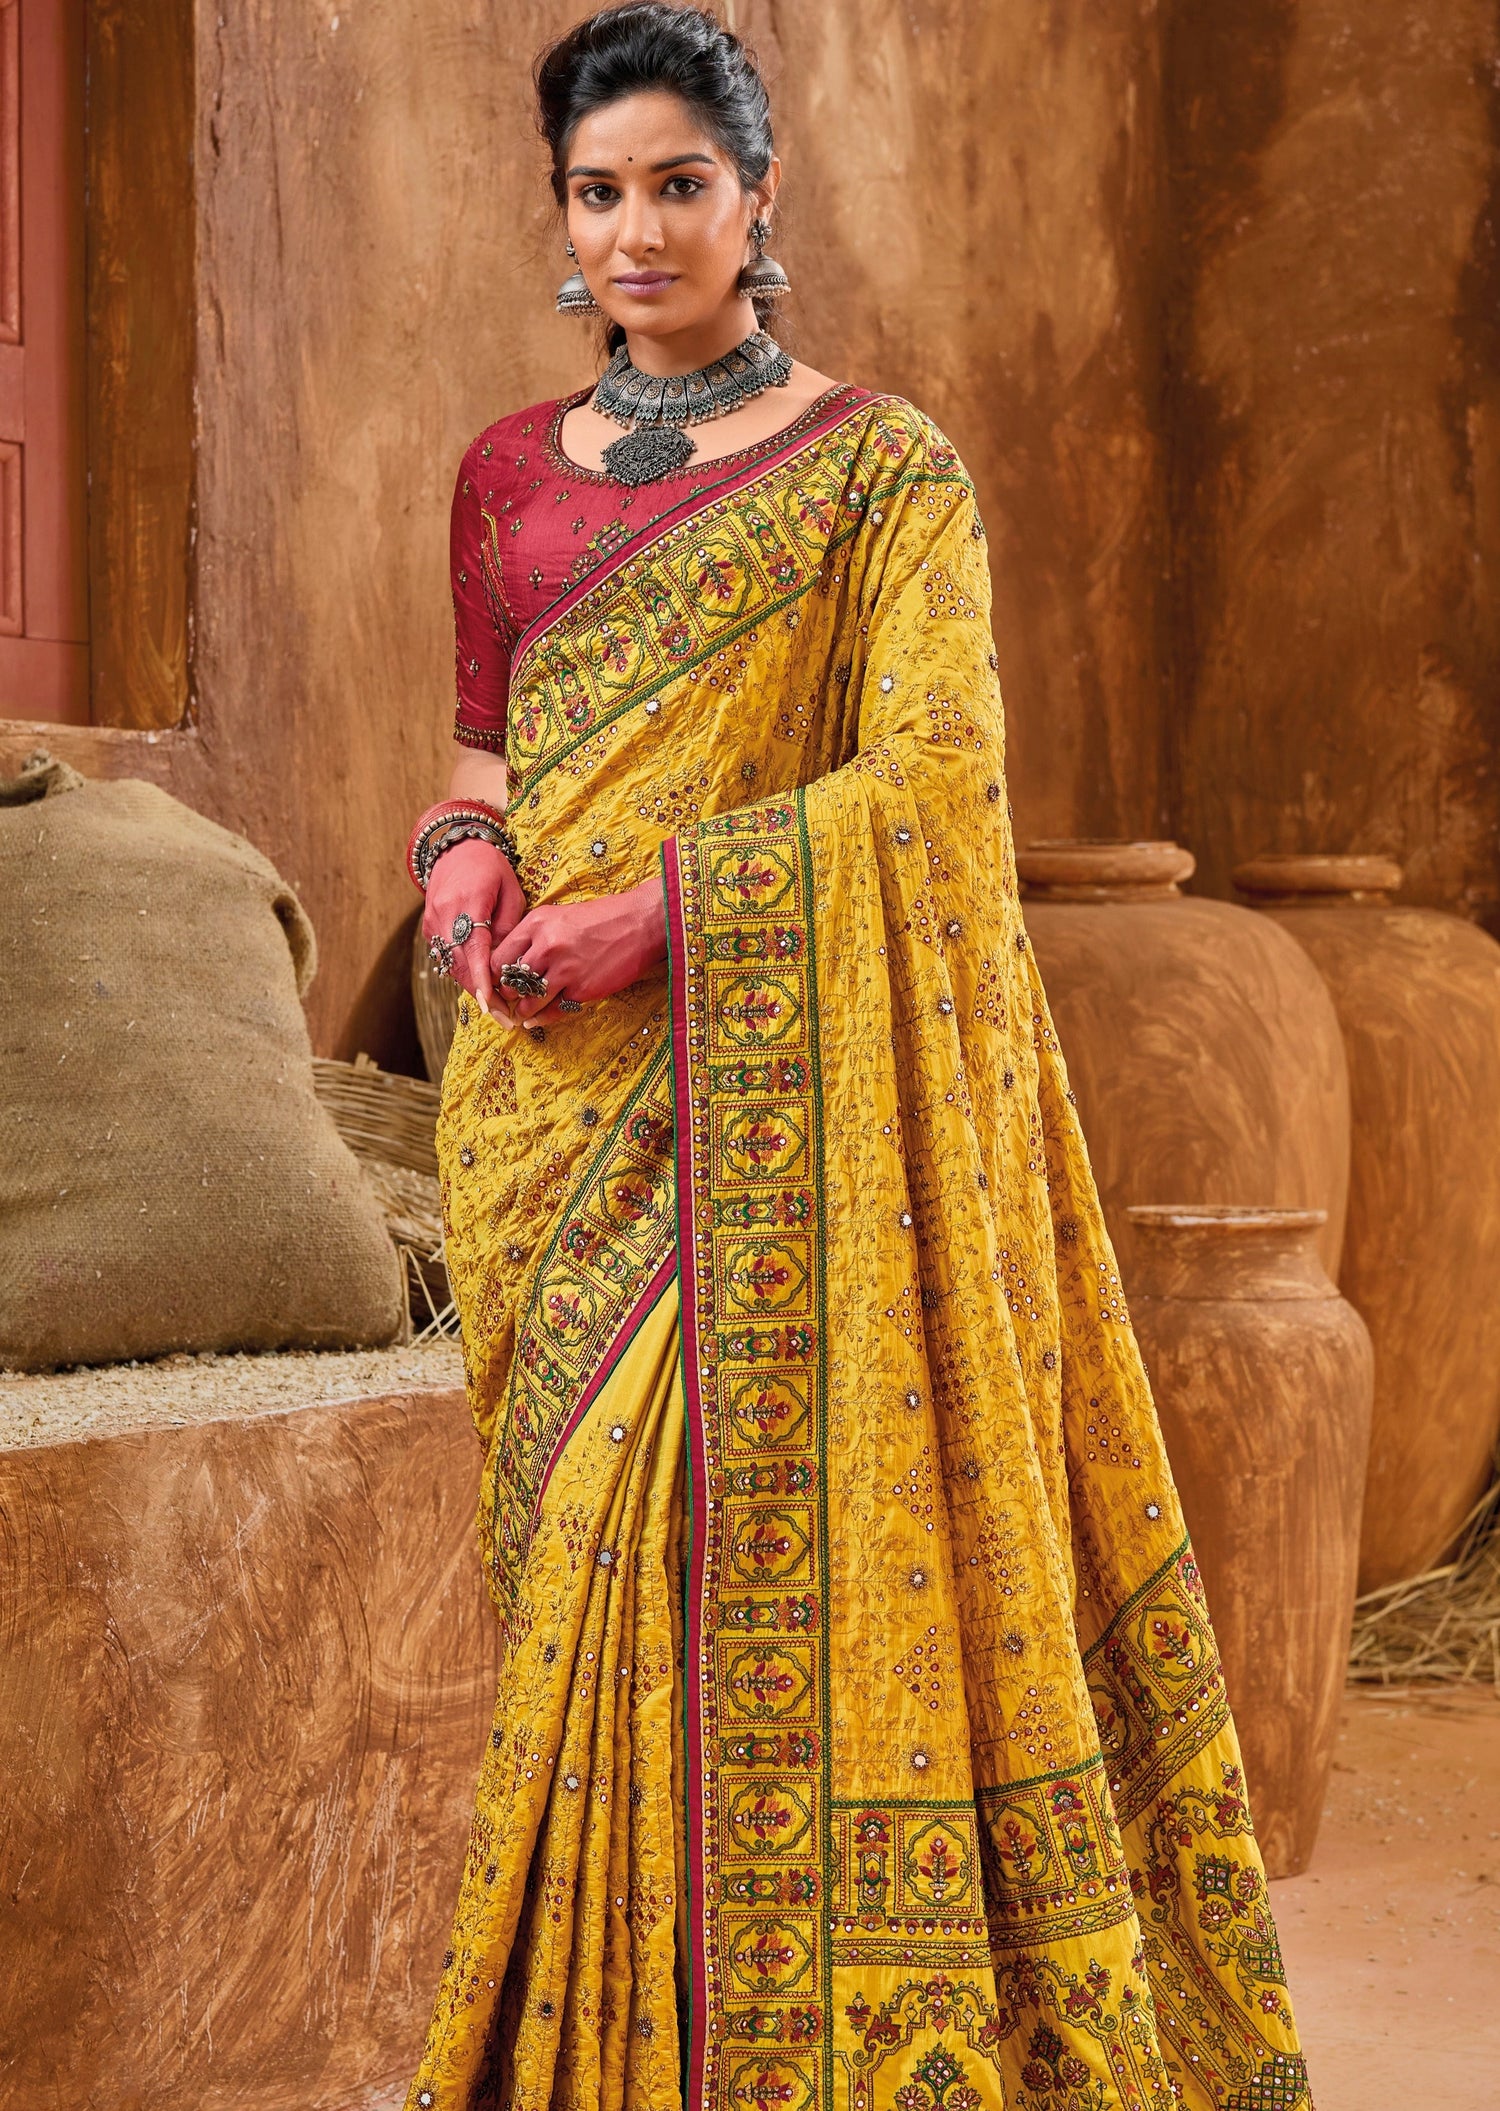 Discover 151+ red with yellow saree